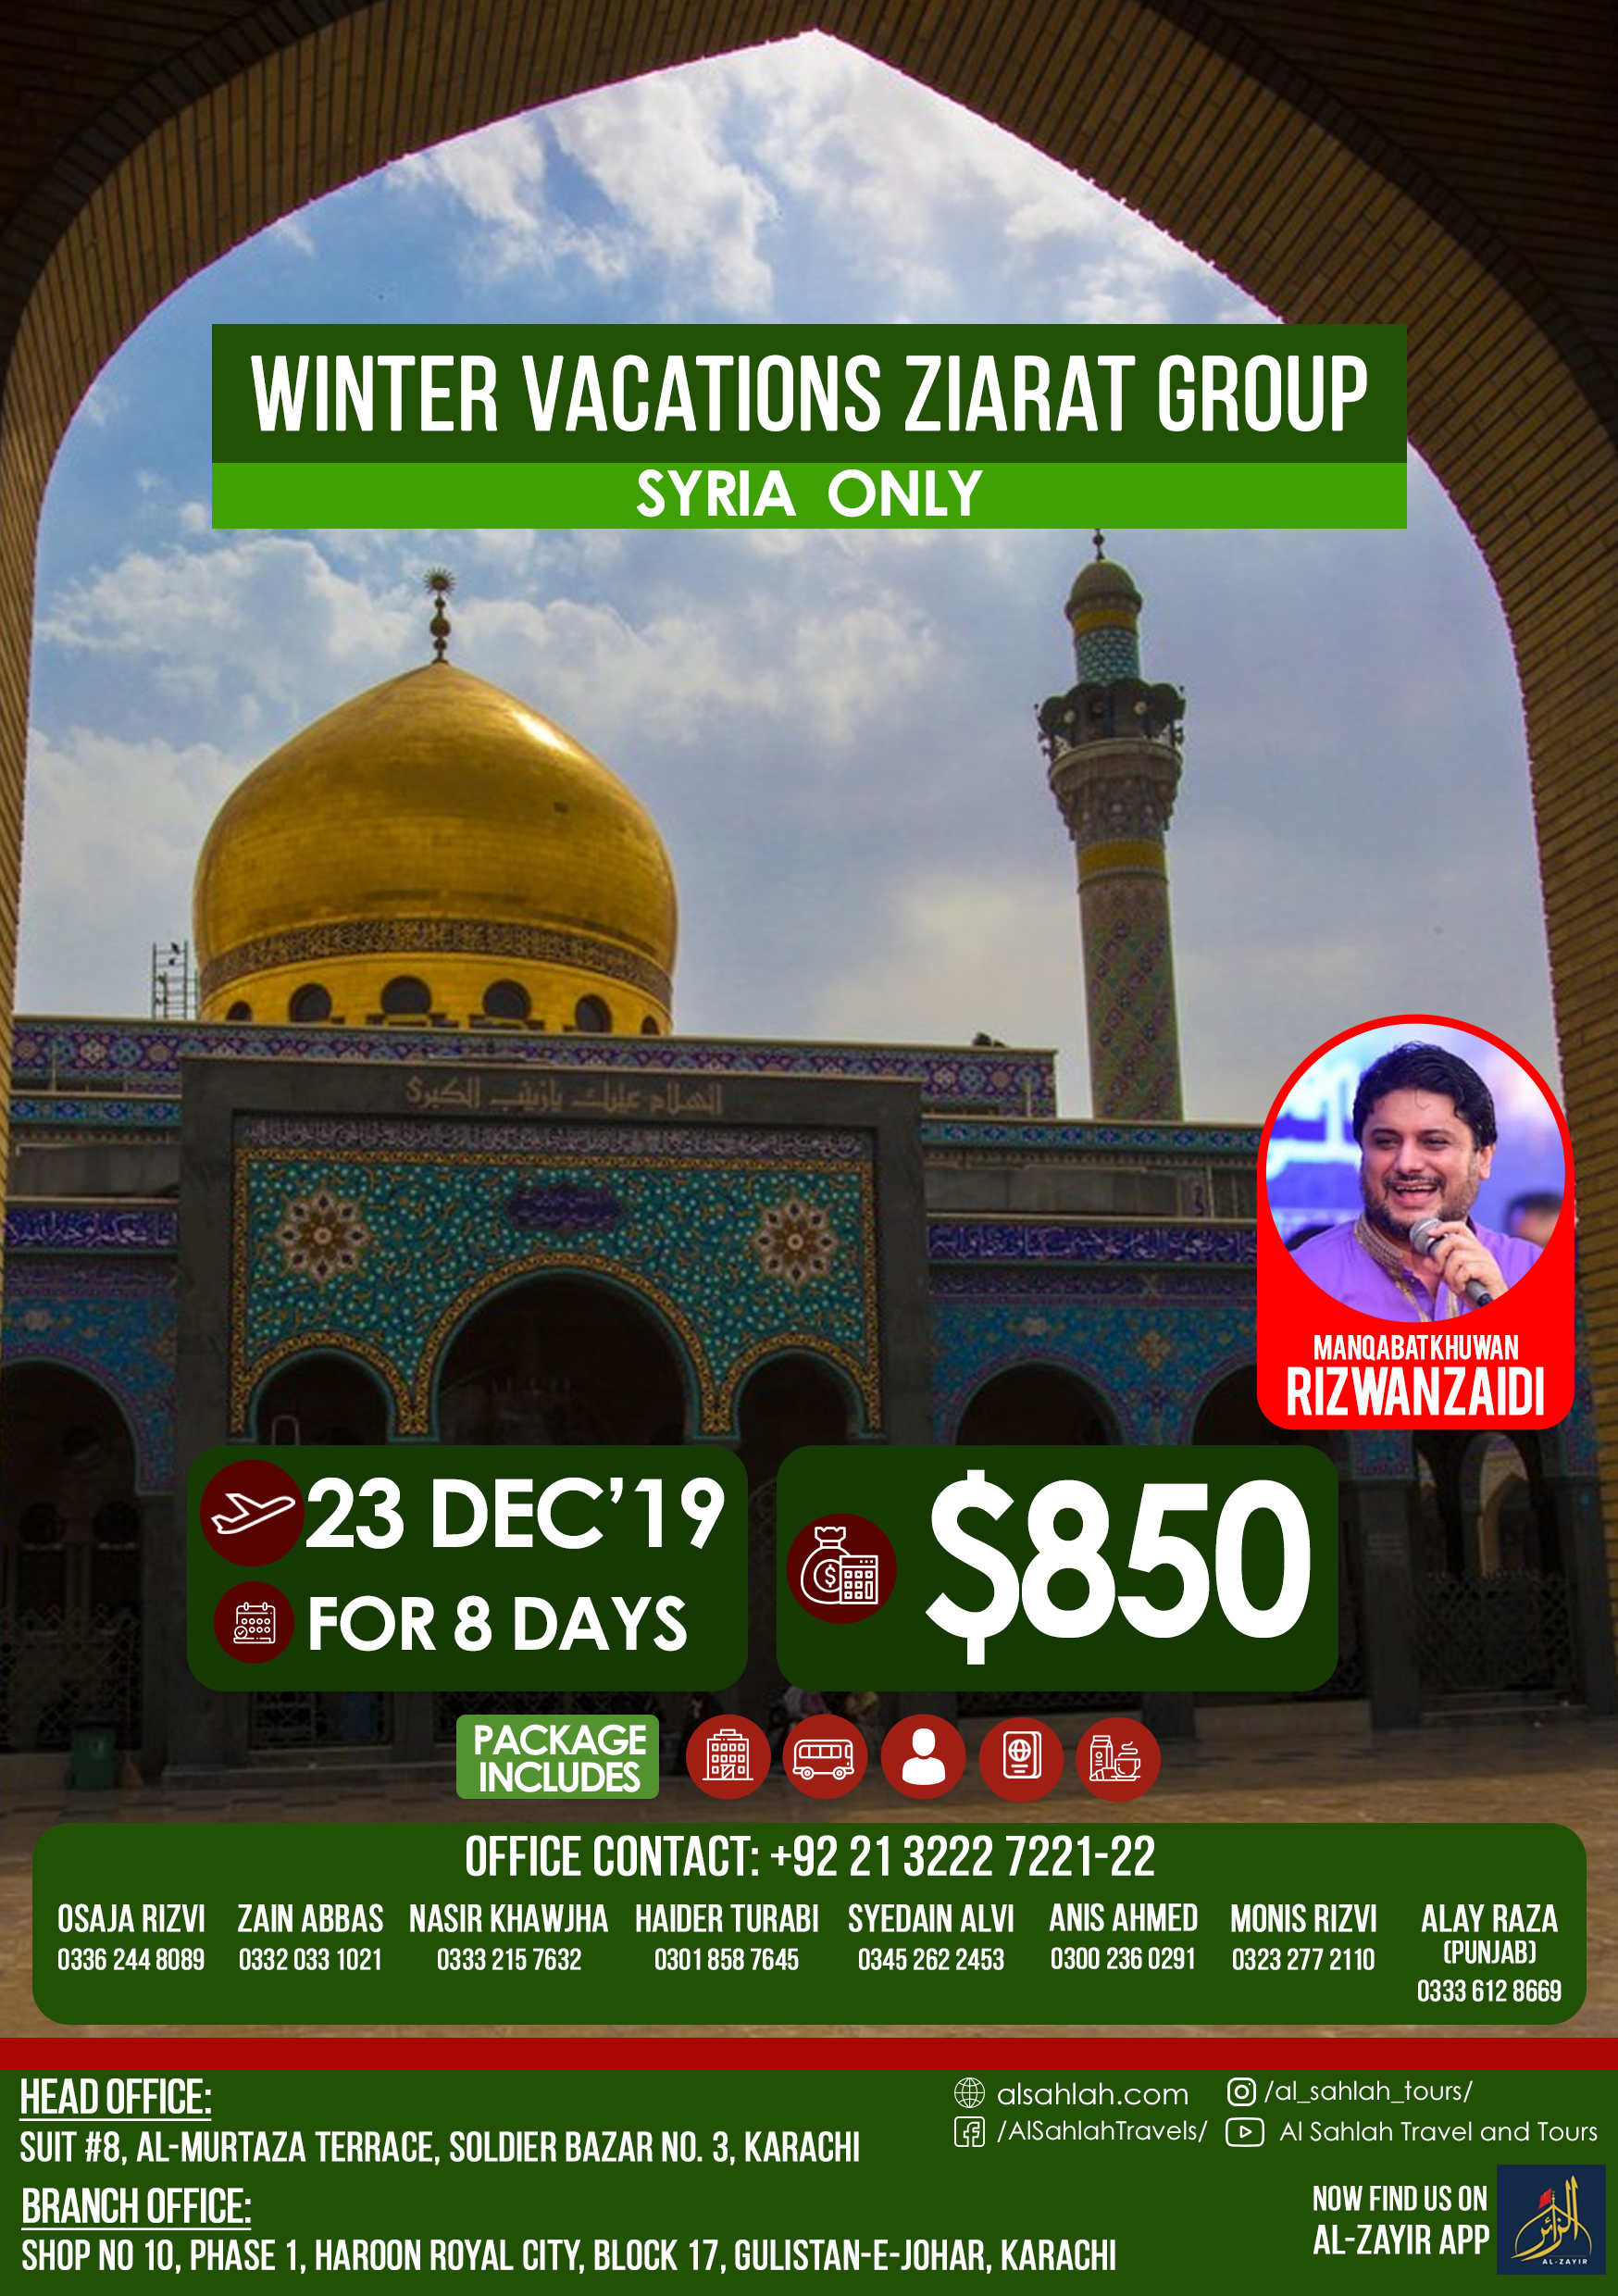 Winter Vacation Ziarat group/package for Syria